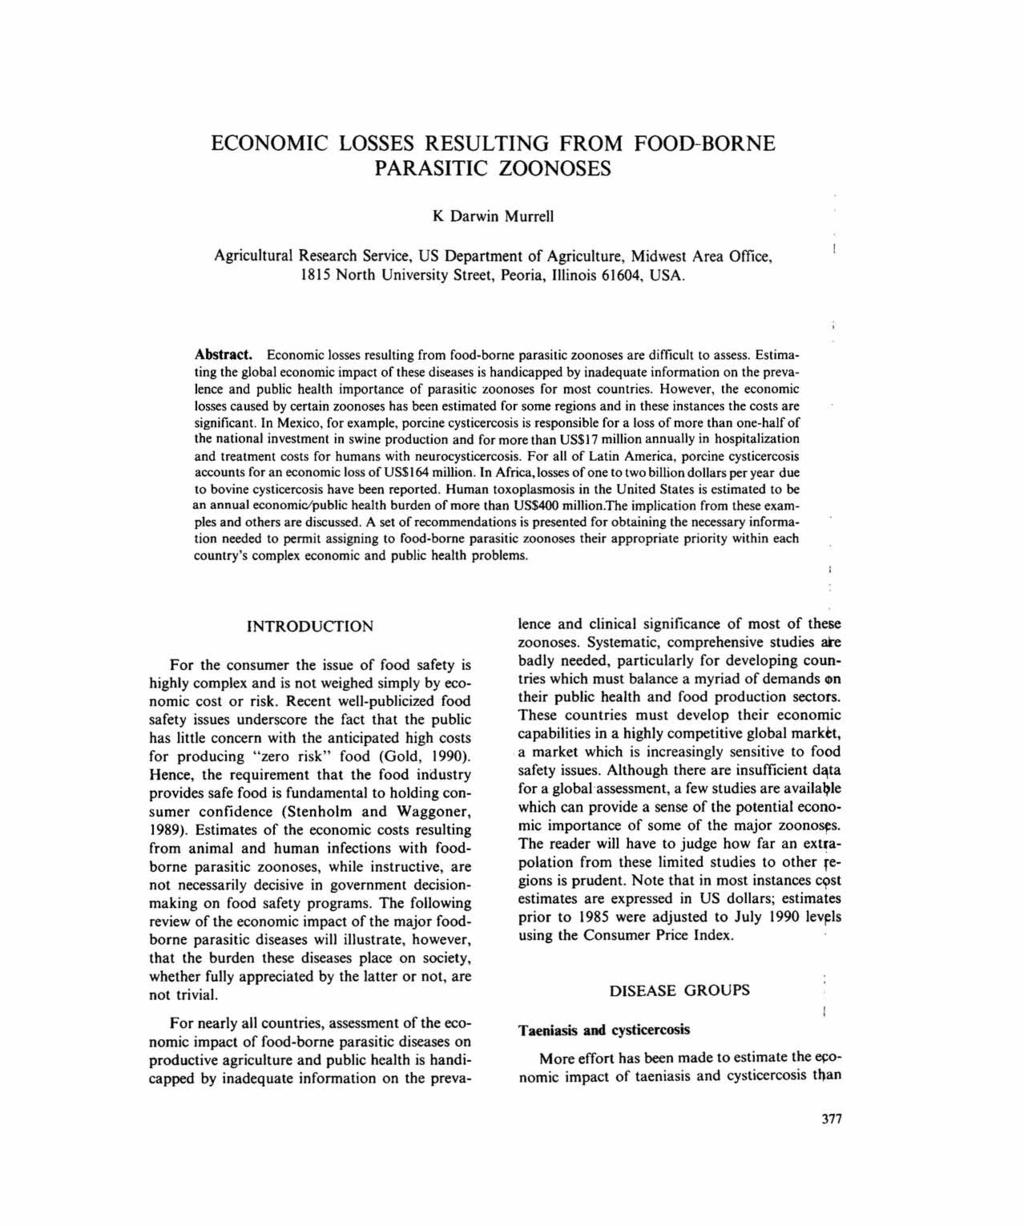 ECONOMIC LOSSES RESULTING FROM FOOD-BORNE PARASITIC ZOONOSES K Darwin Murrell Agricultural Research Service, US Department of Agriculture, Midwest Area Office, 1815 North University Street, Peoria,